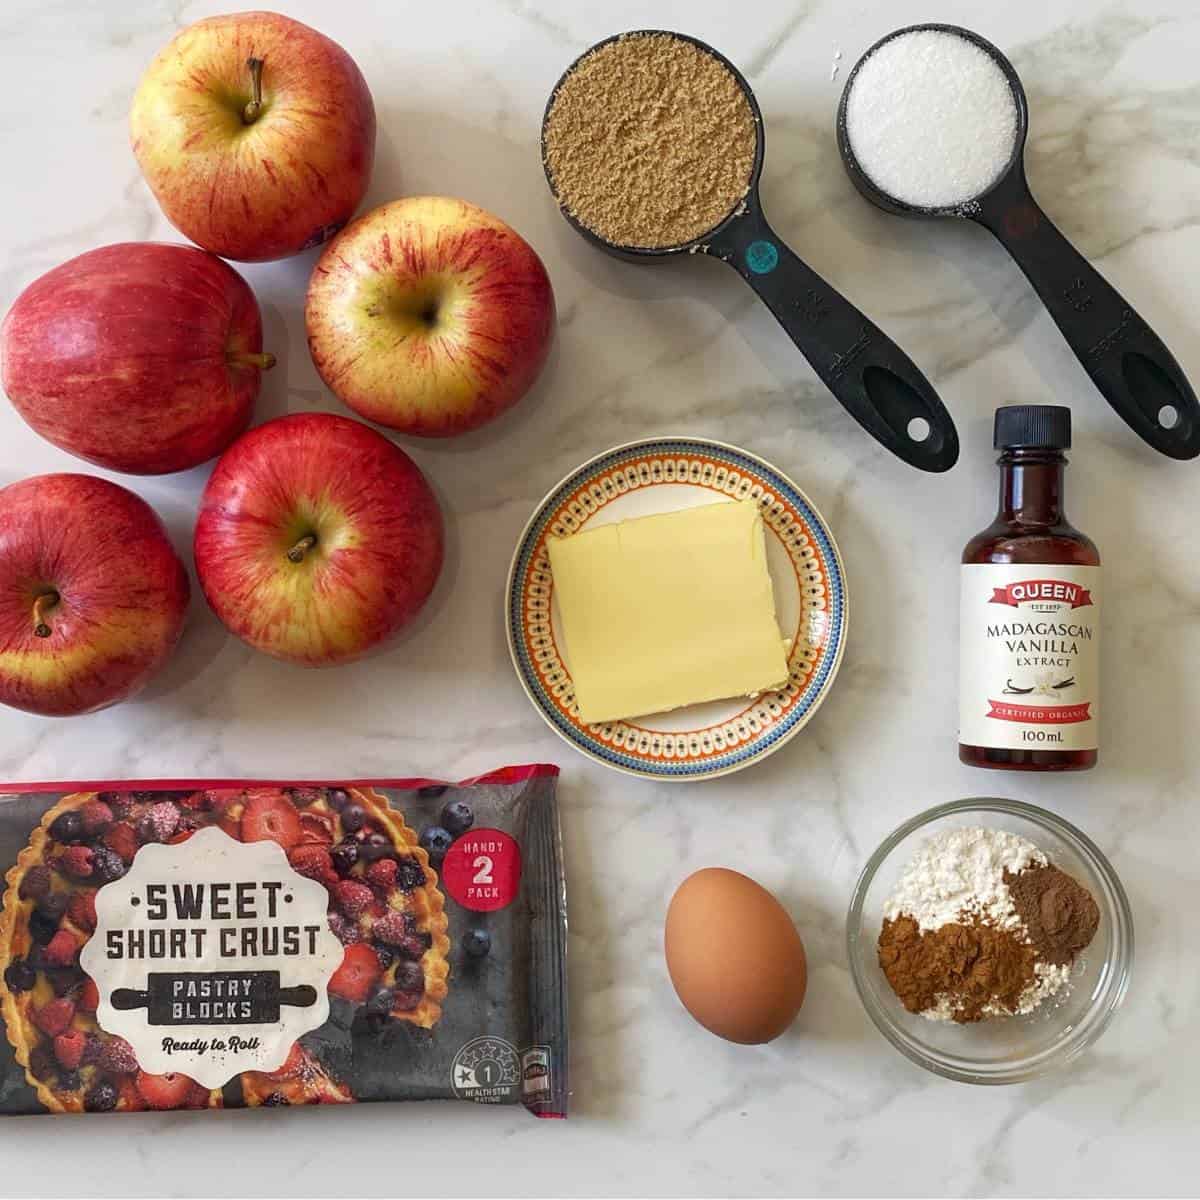 The ingredients for apple pie